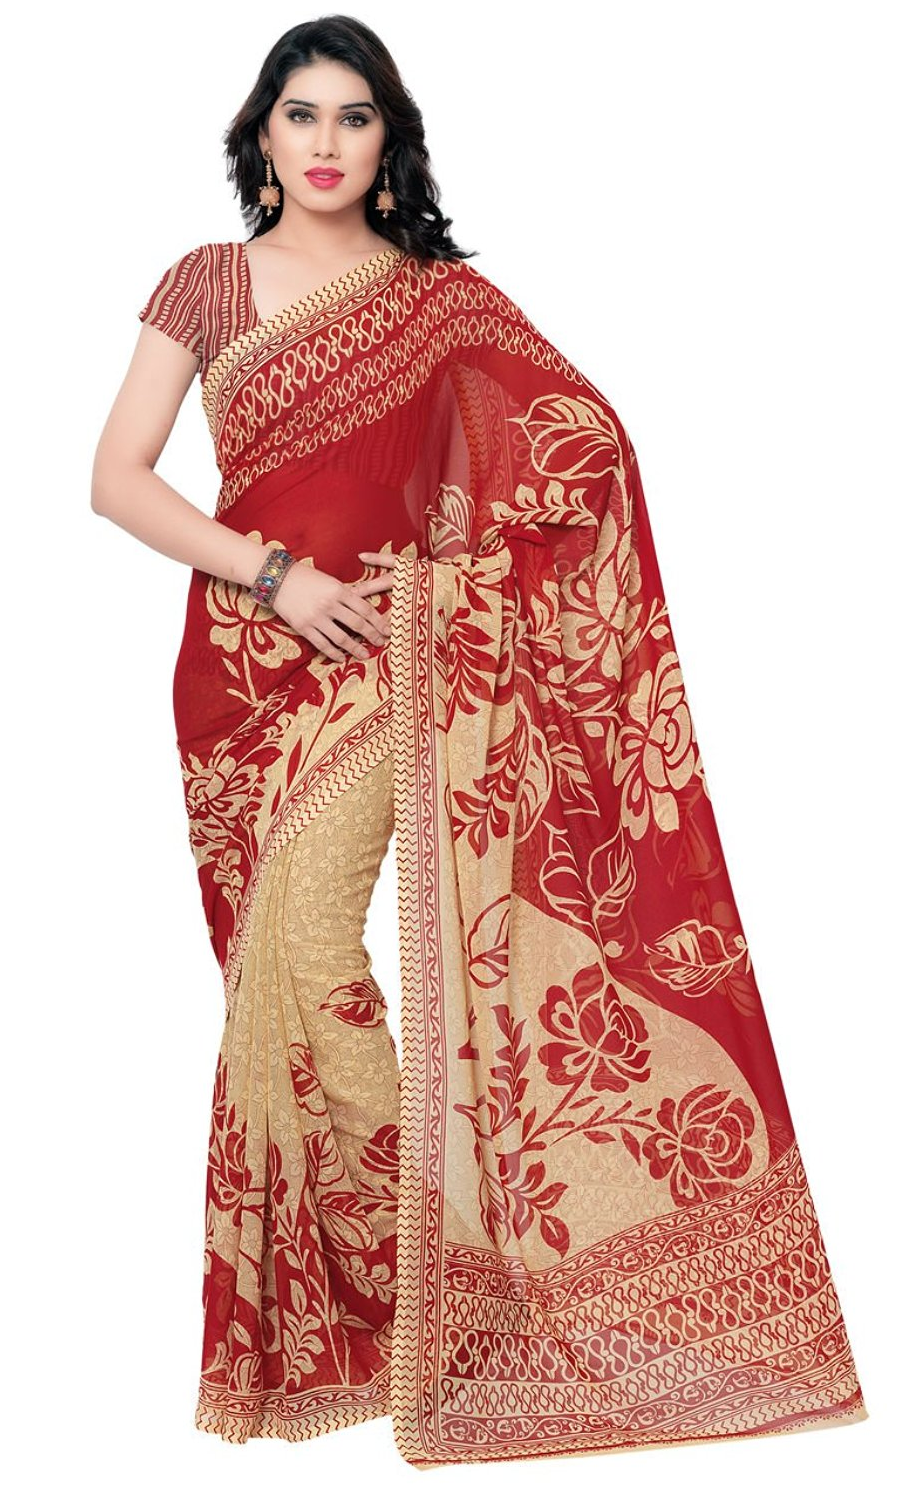 Amazon - Buy Anand Sarees Saree (Ivory Red) for just Rs.100